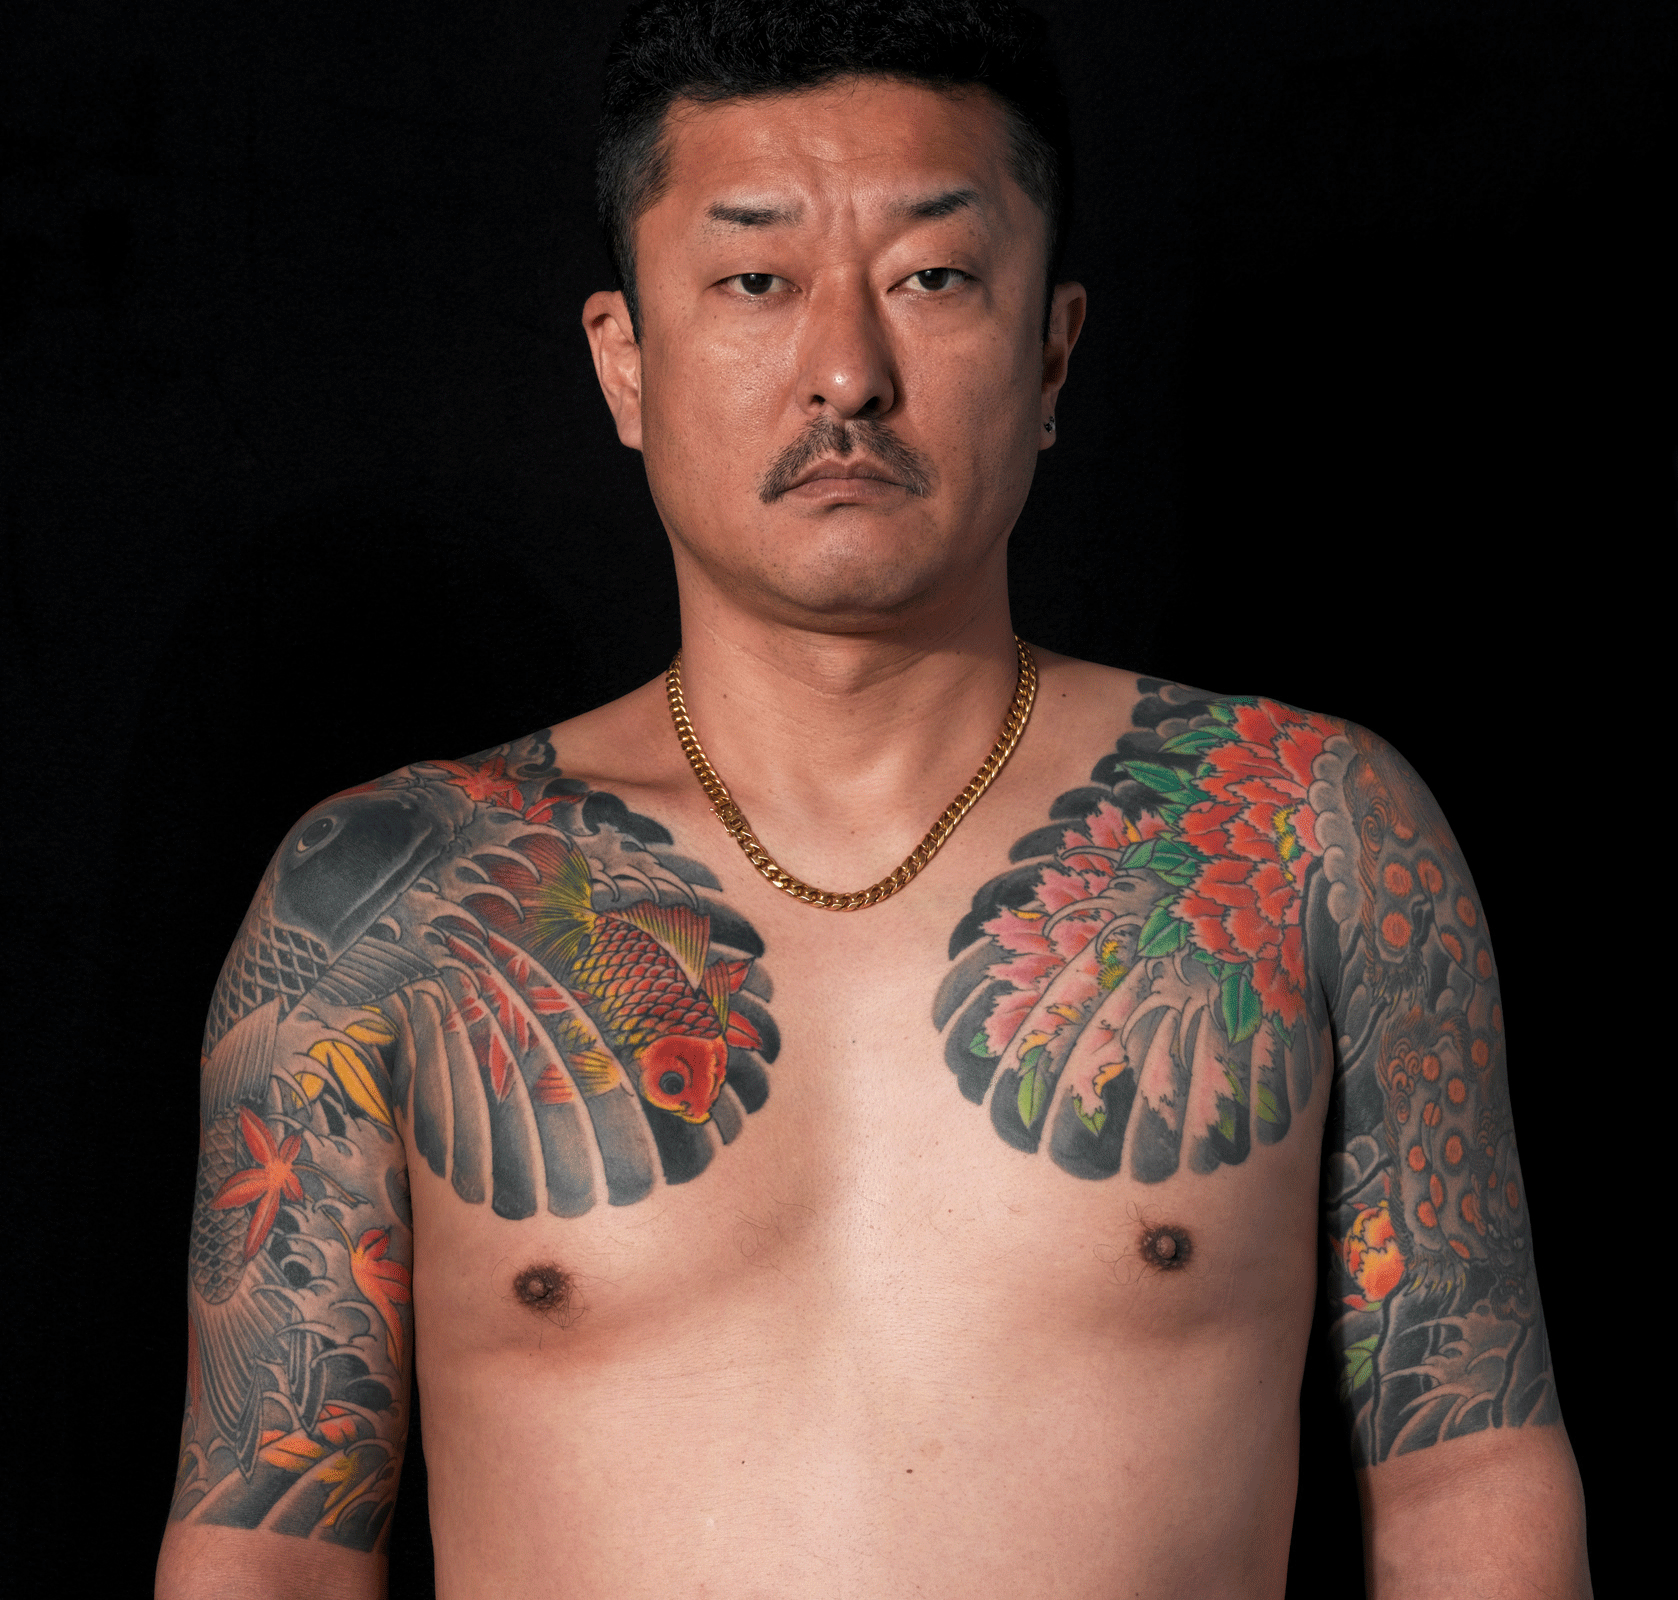 Yakuza Tattoos Designs, Ideas and Meaning | Tattoos For You